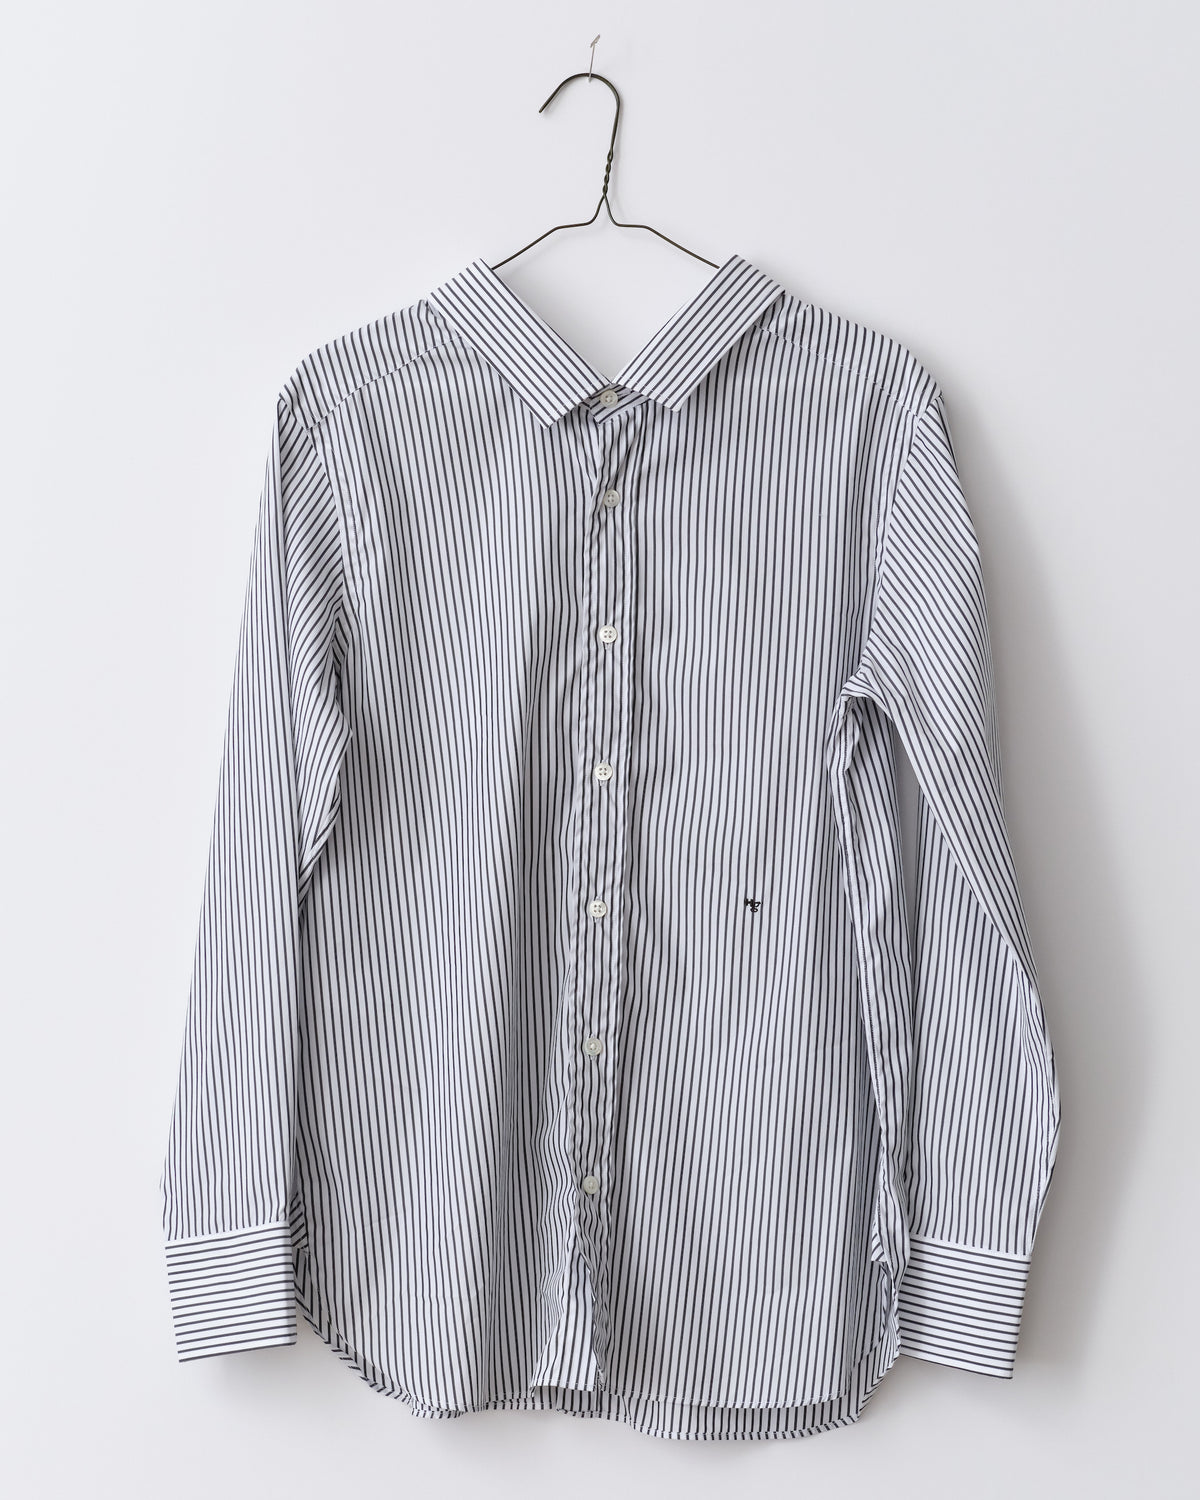 Front Back Classic Shirt in Faded Black Stripe